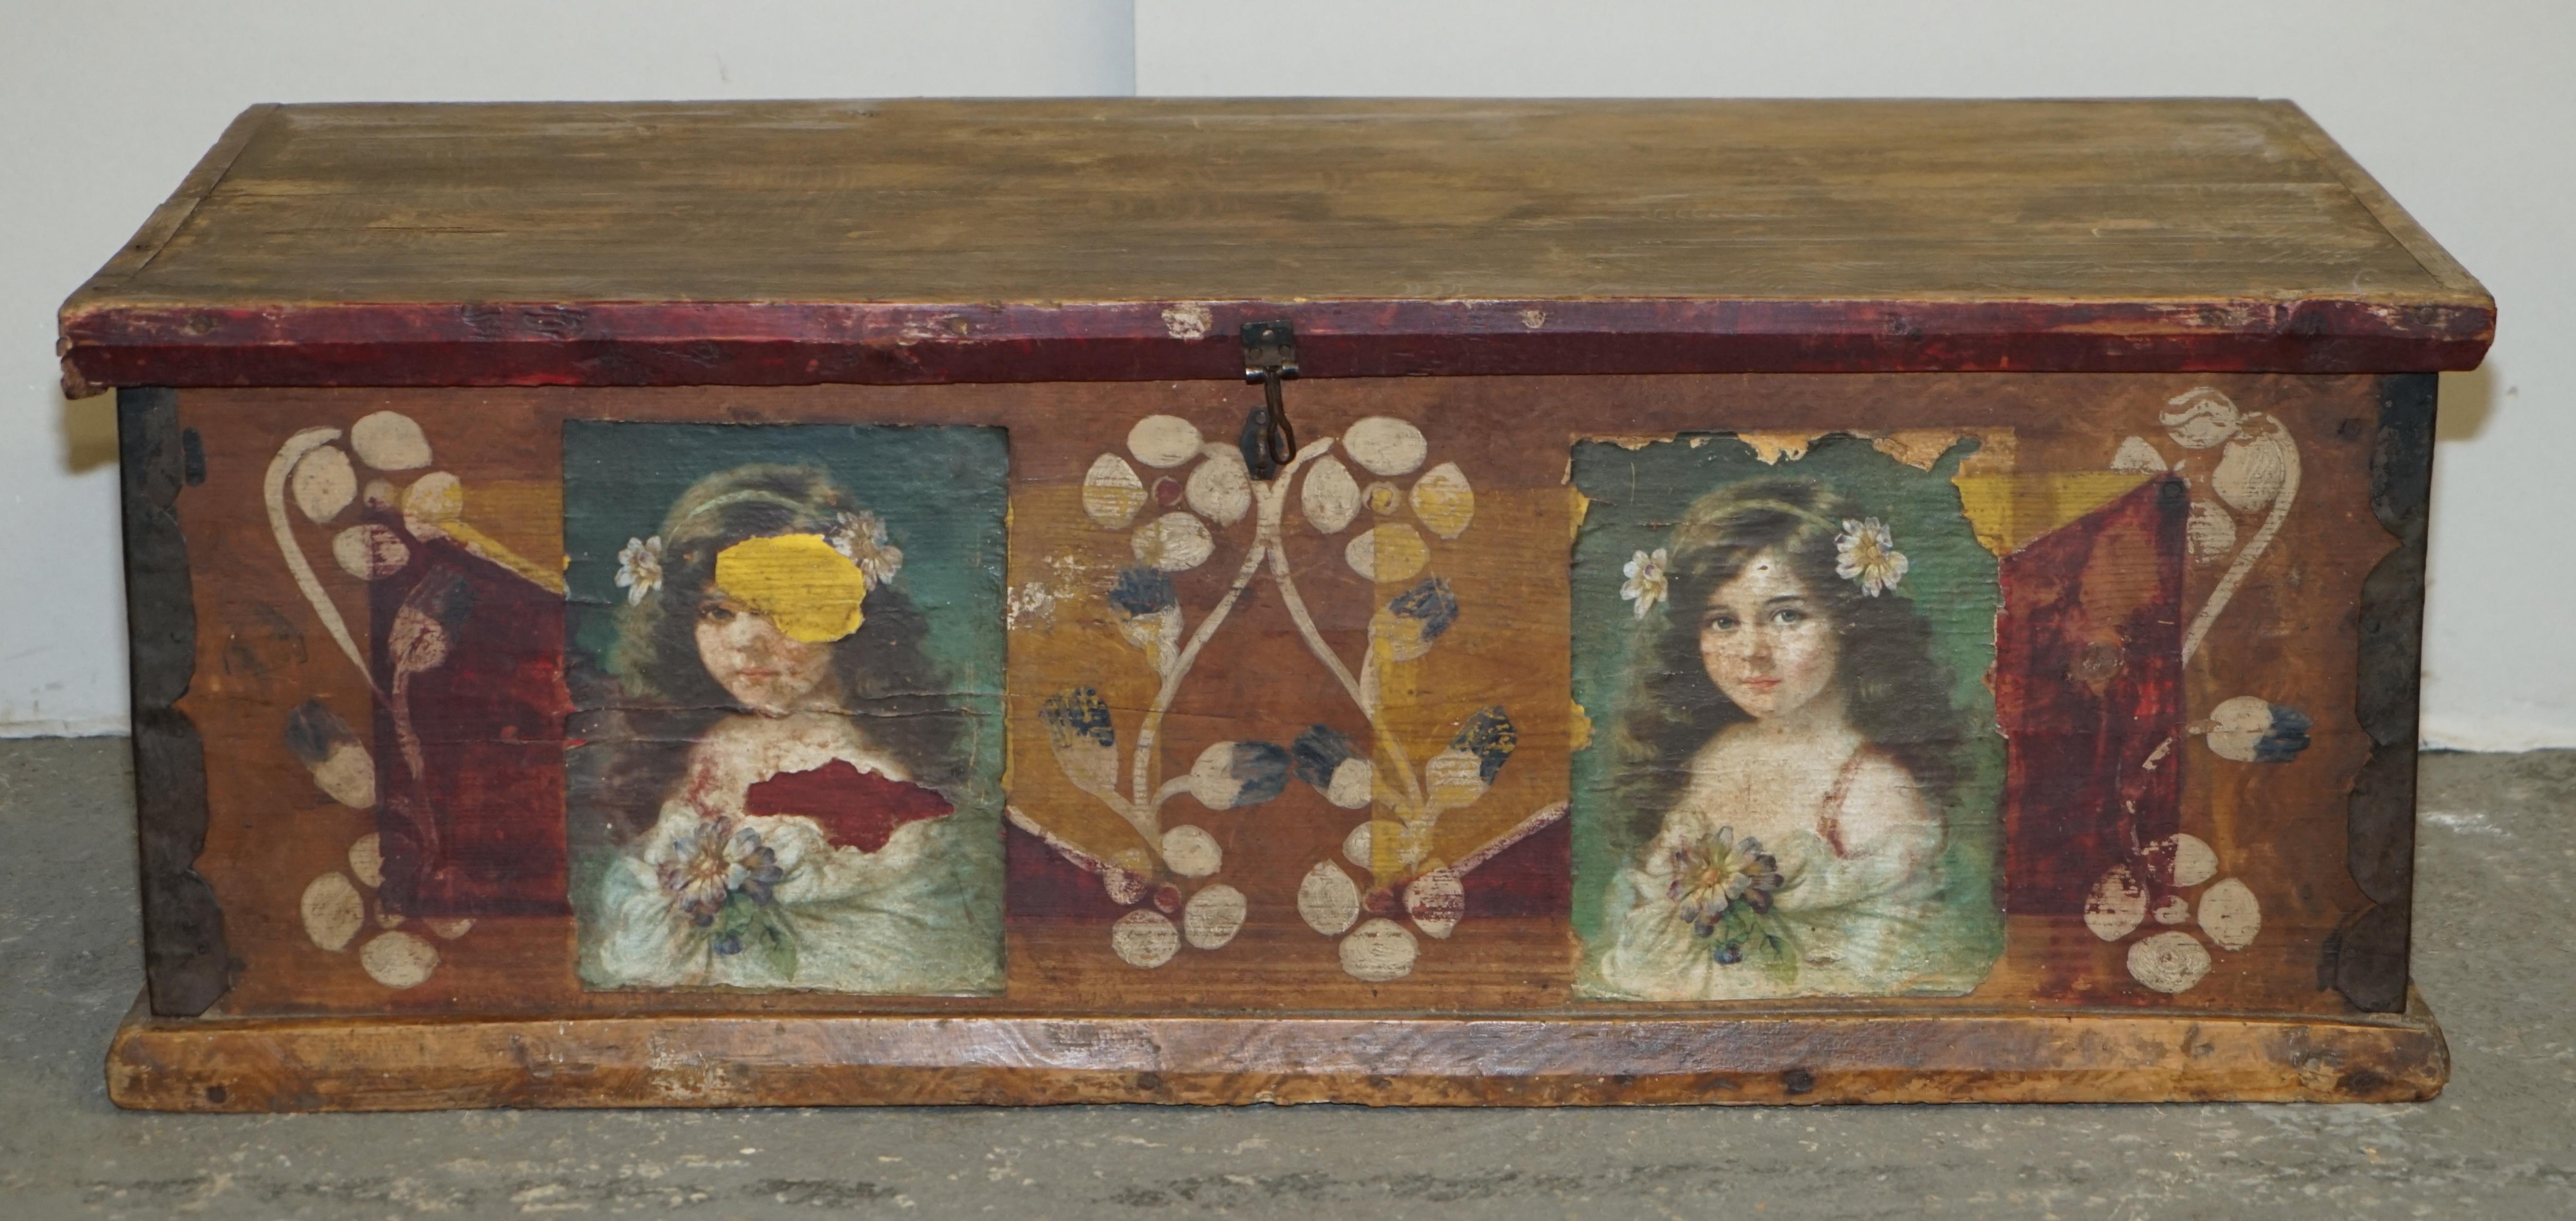 We are delighted to offer for sale this stunning, circa 1900 hand painted Romanian clothes trunk or marriage coffer chest depicting Children's portraits and floral paintings 

I have recently purchased a very large collection of these original,